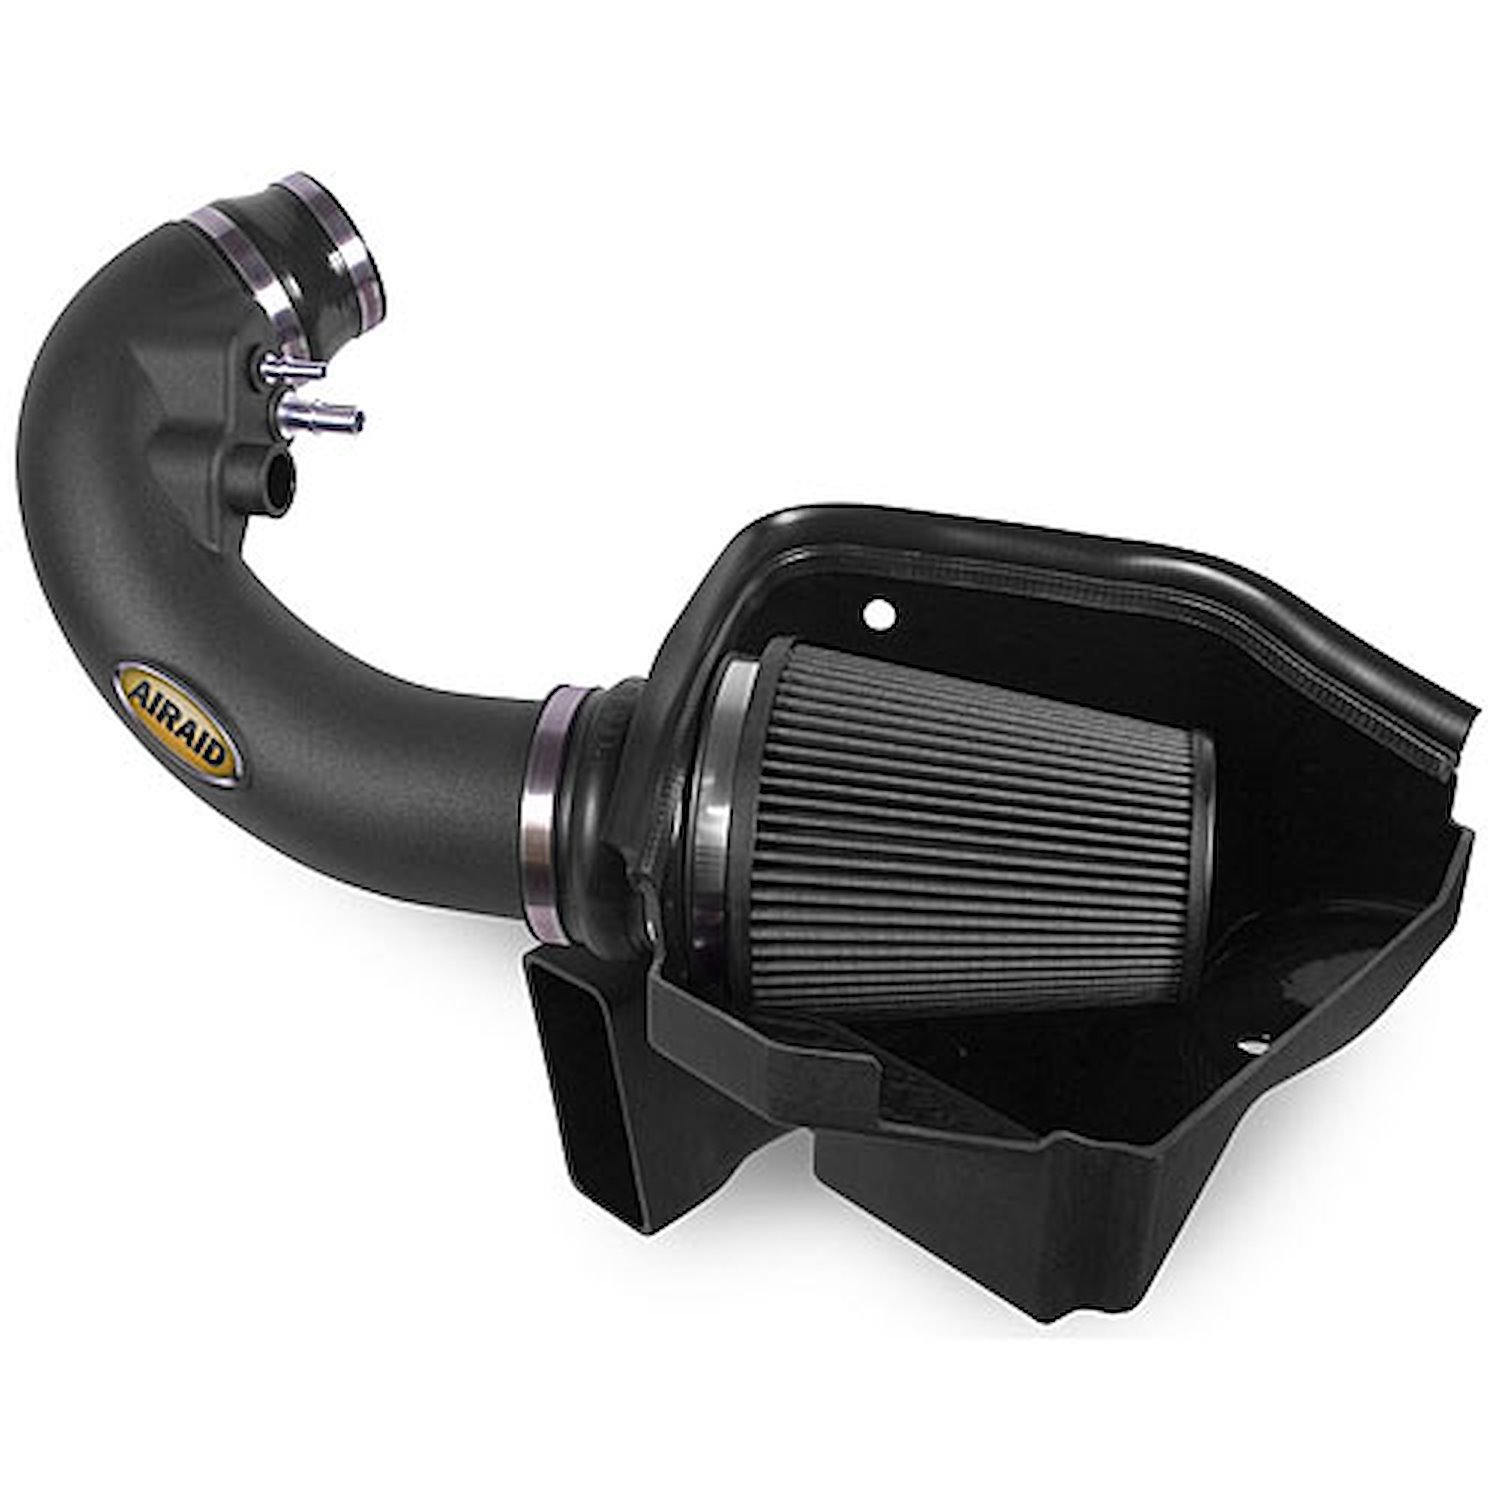 MXP Cold Air Intake System 2011-2014 Ford Mustang GT 5.0L